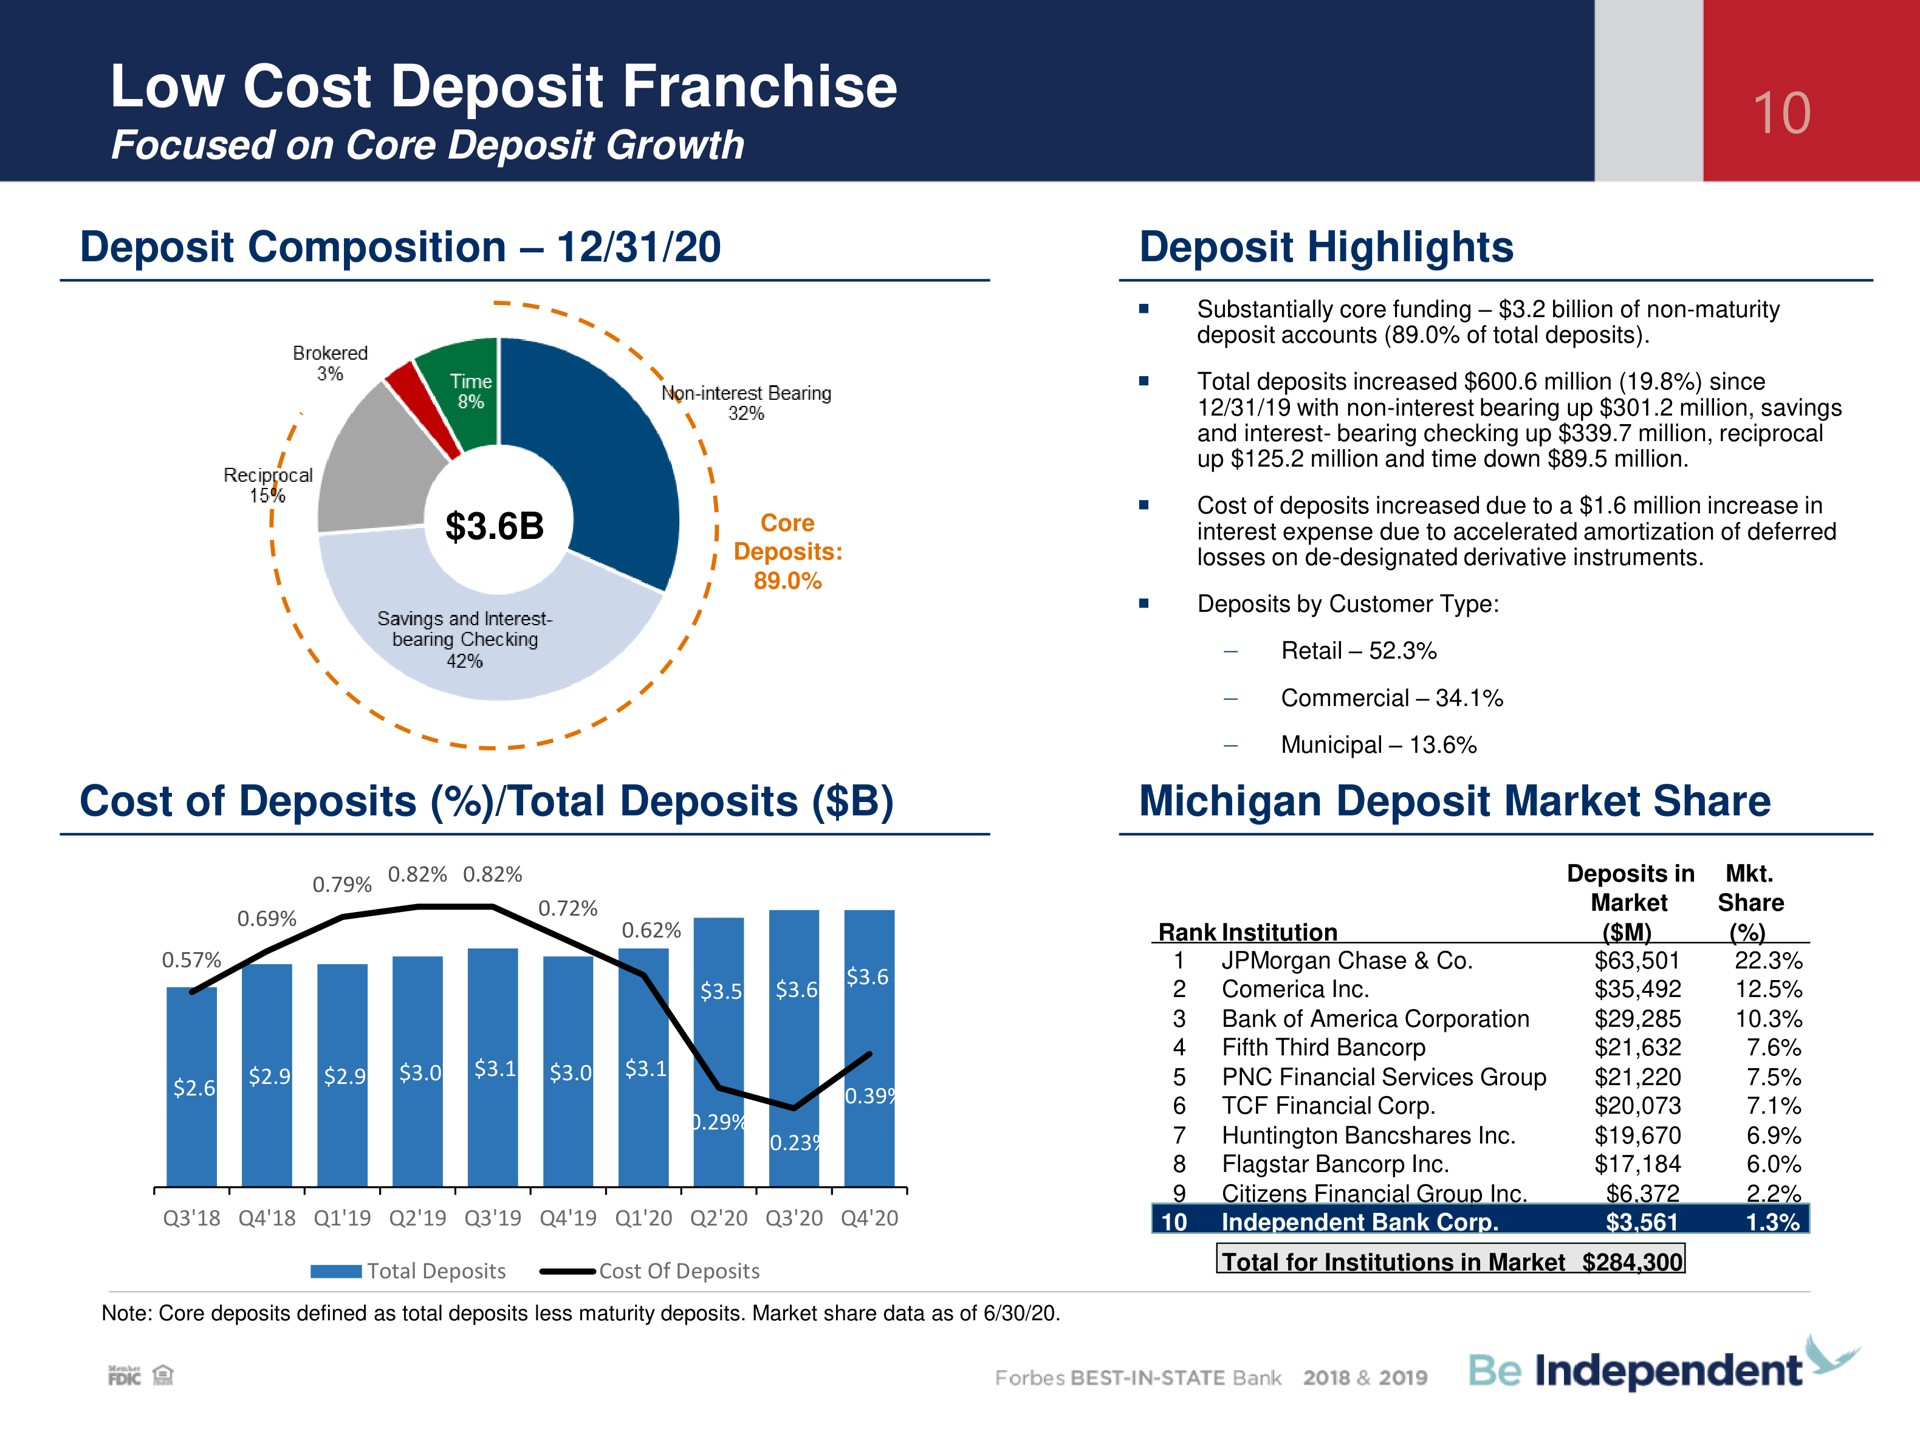 low cost deposit franchise composition highlights michigan market share | Independent Bank Corp